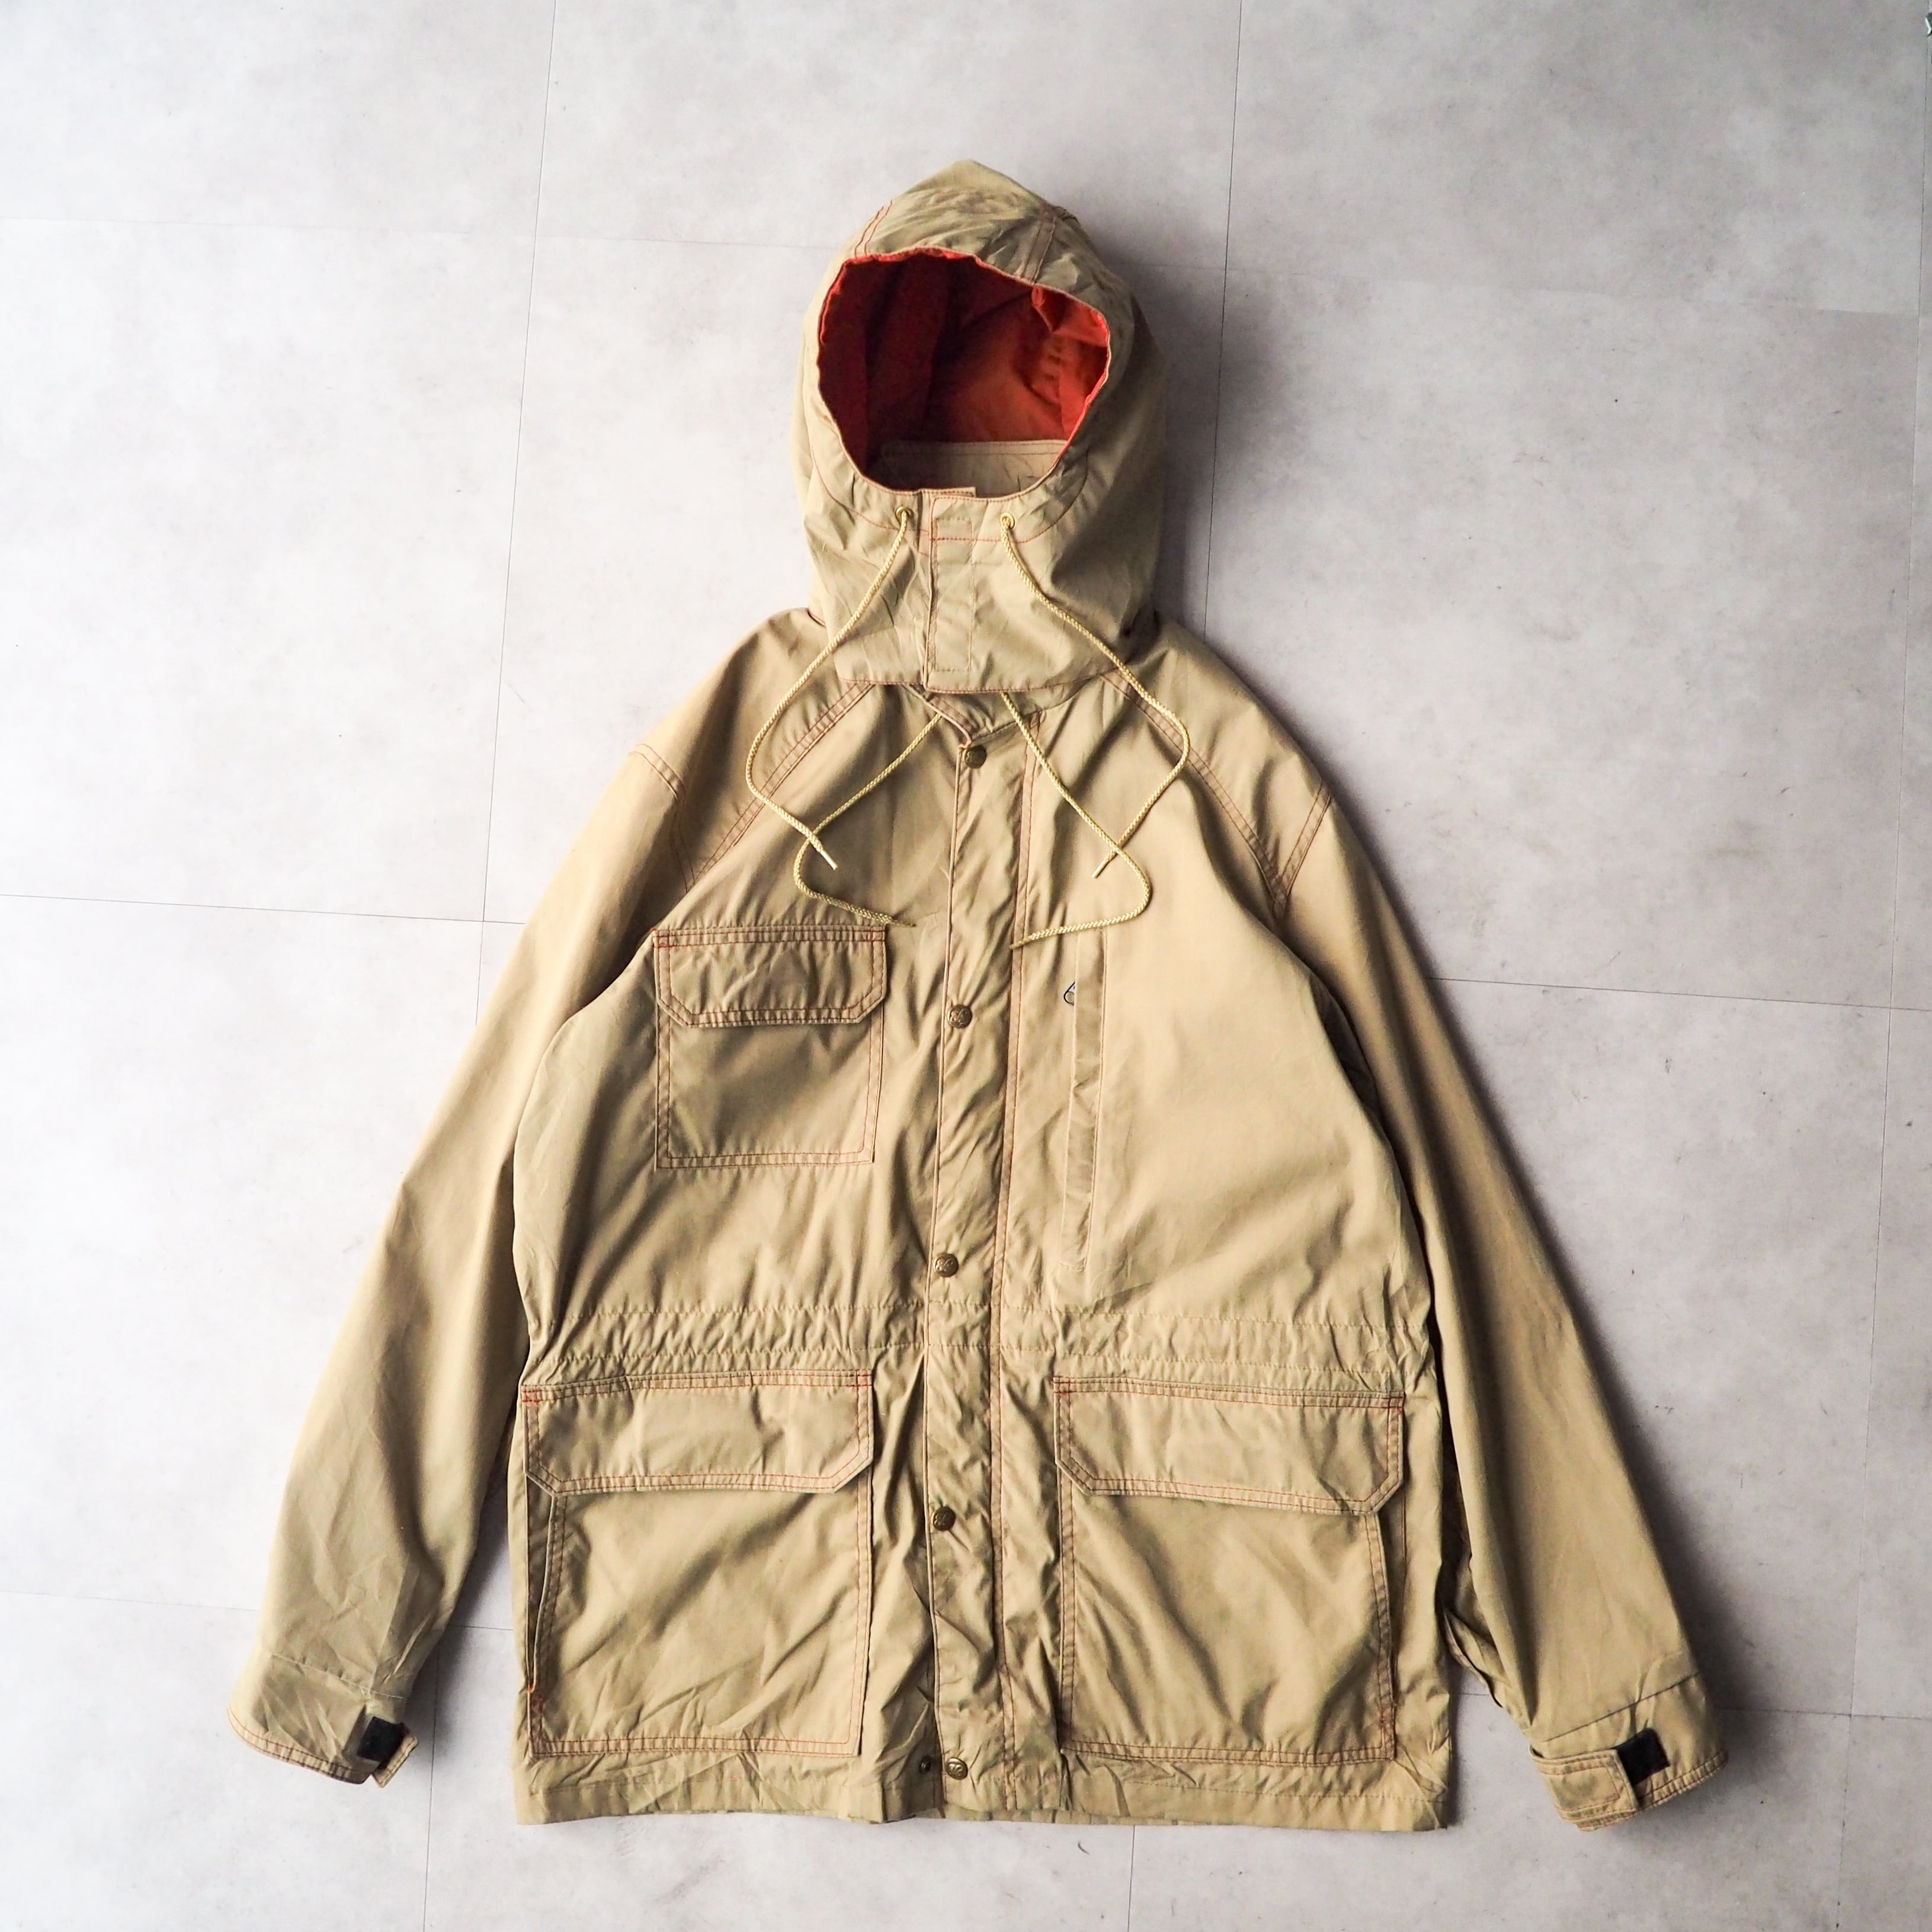 70s-80s “EDDIE BAUER” - storm shed - mountain parka made in USA 70